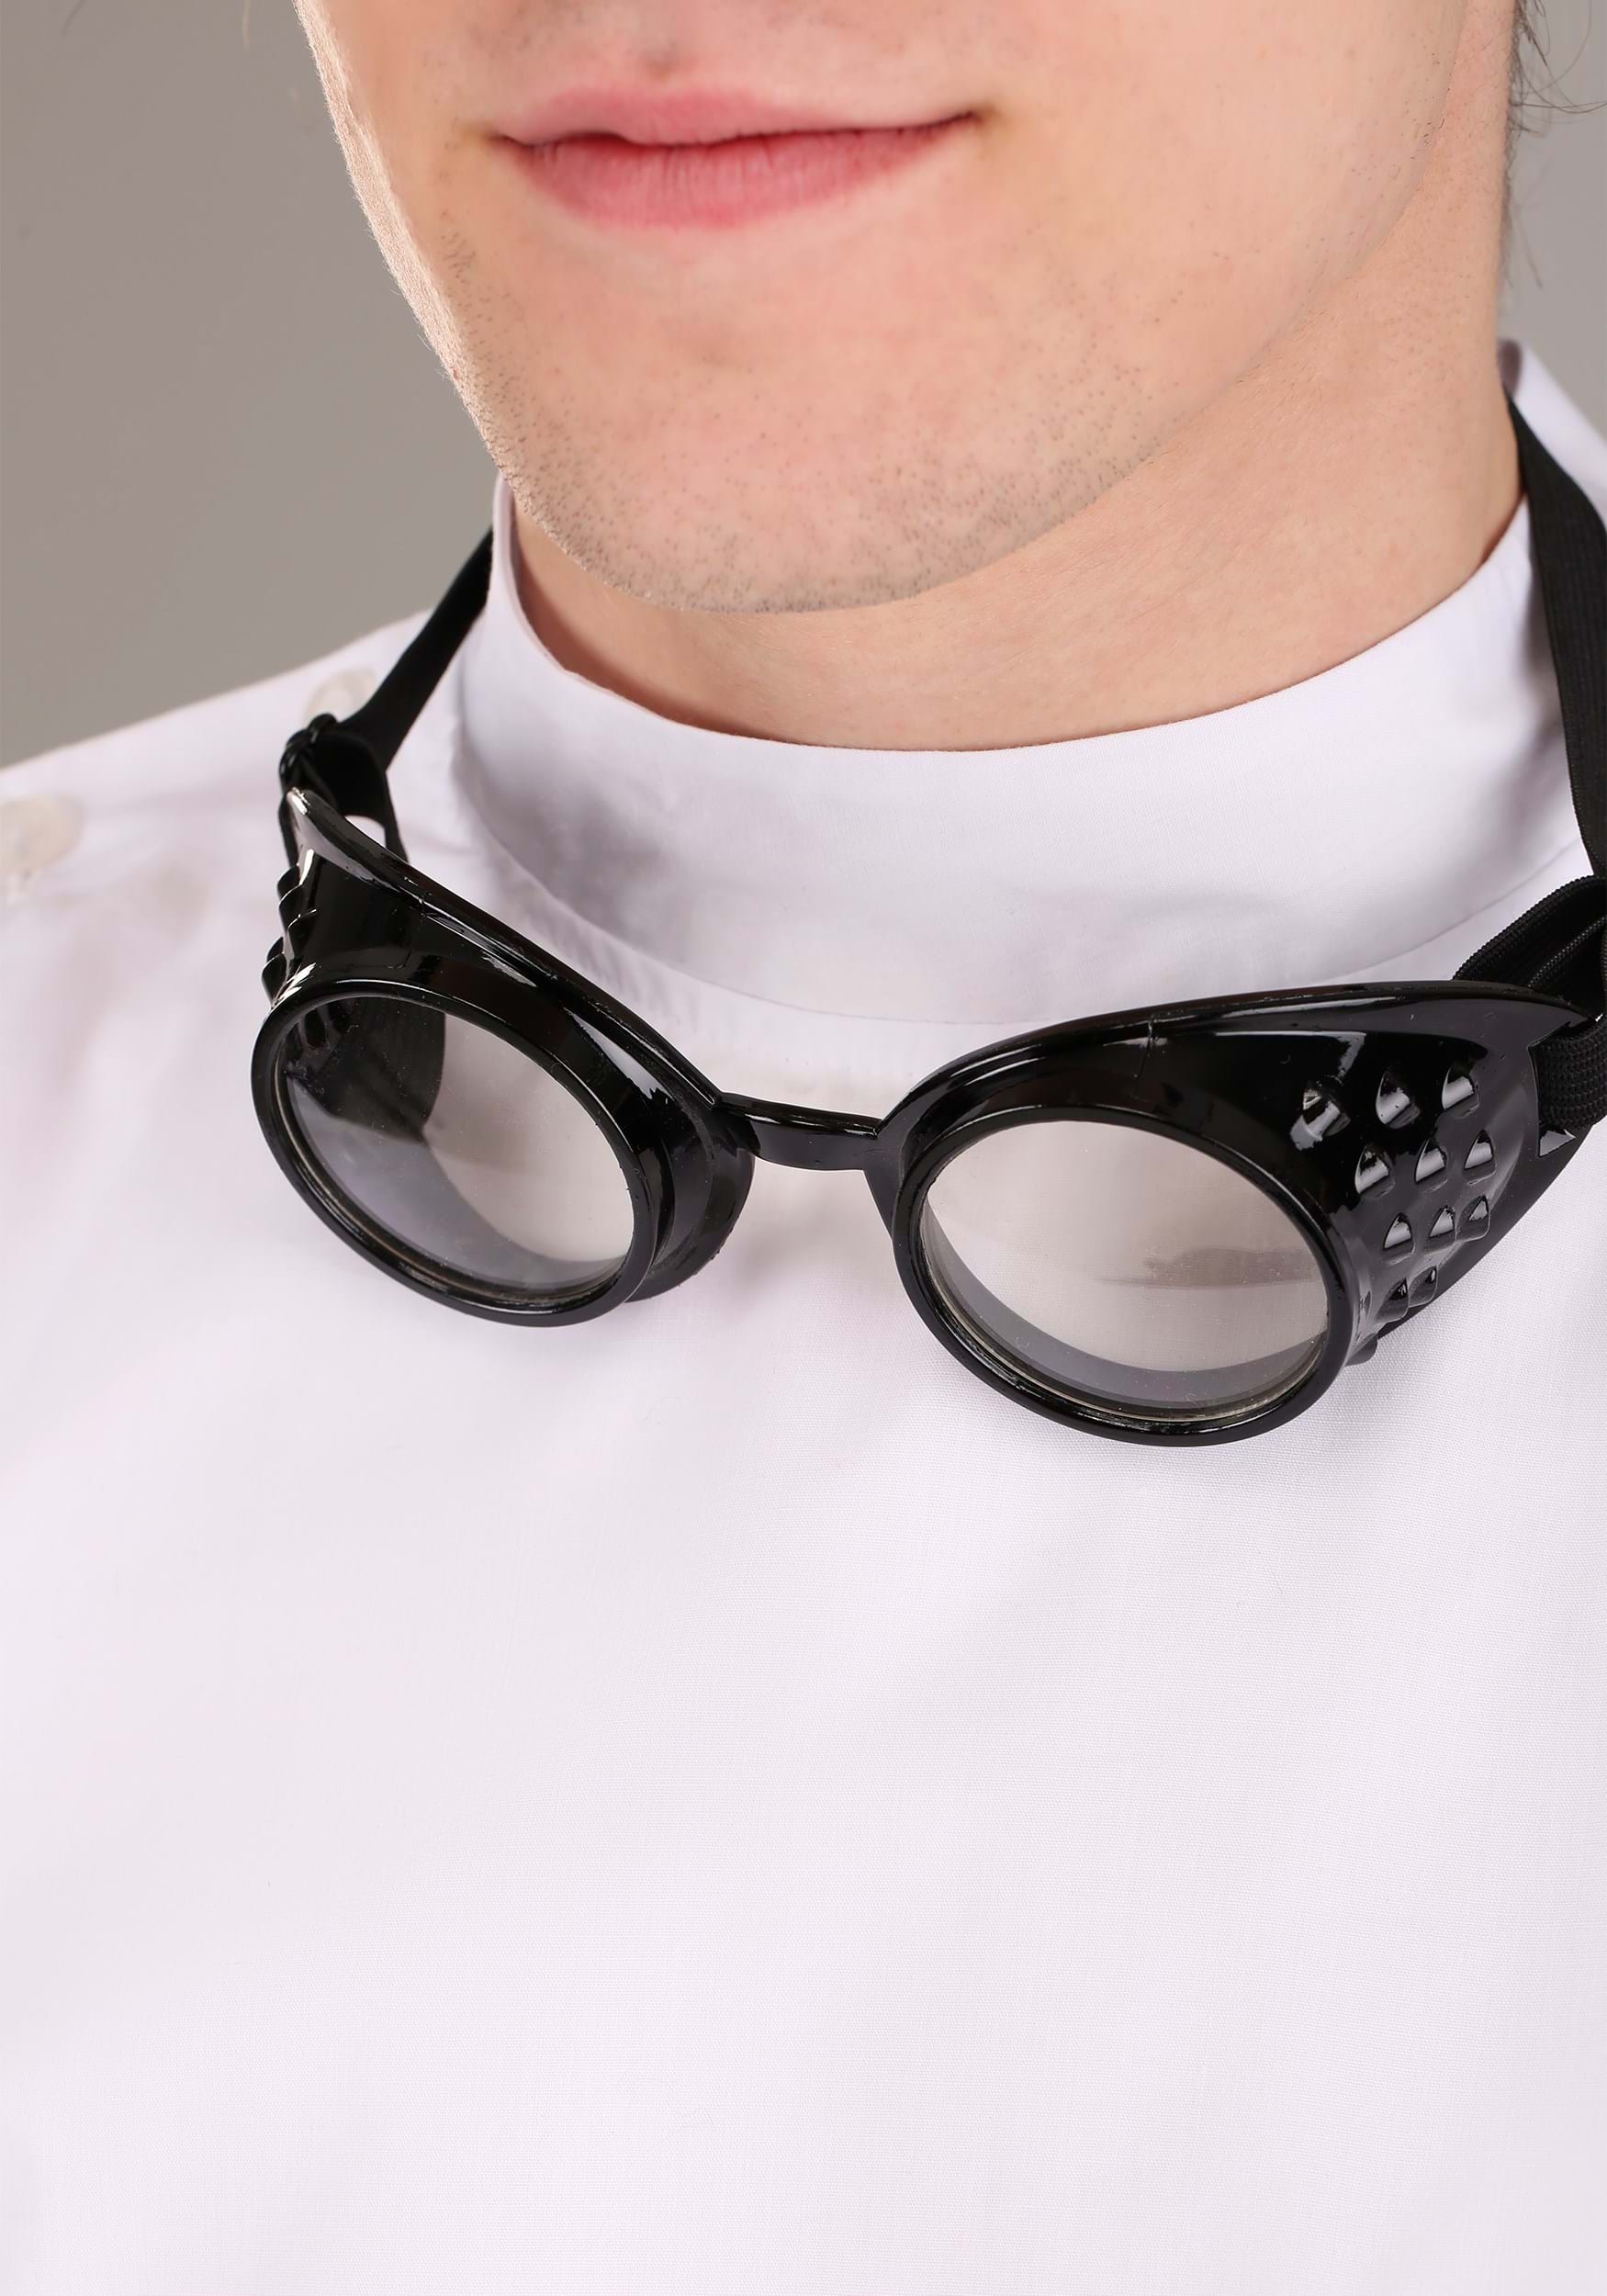 Deluxe Mad Scientist Costume For Adults